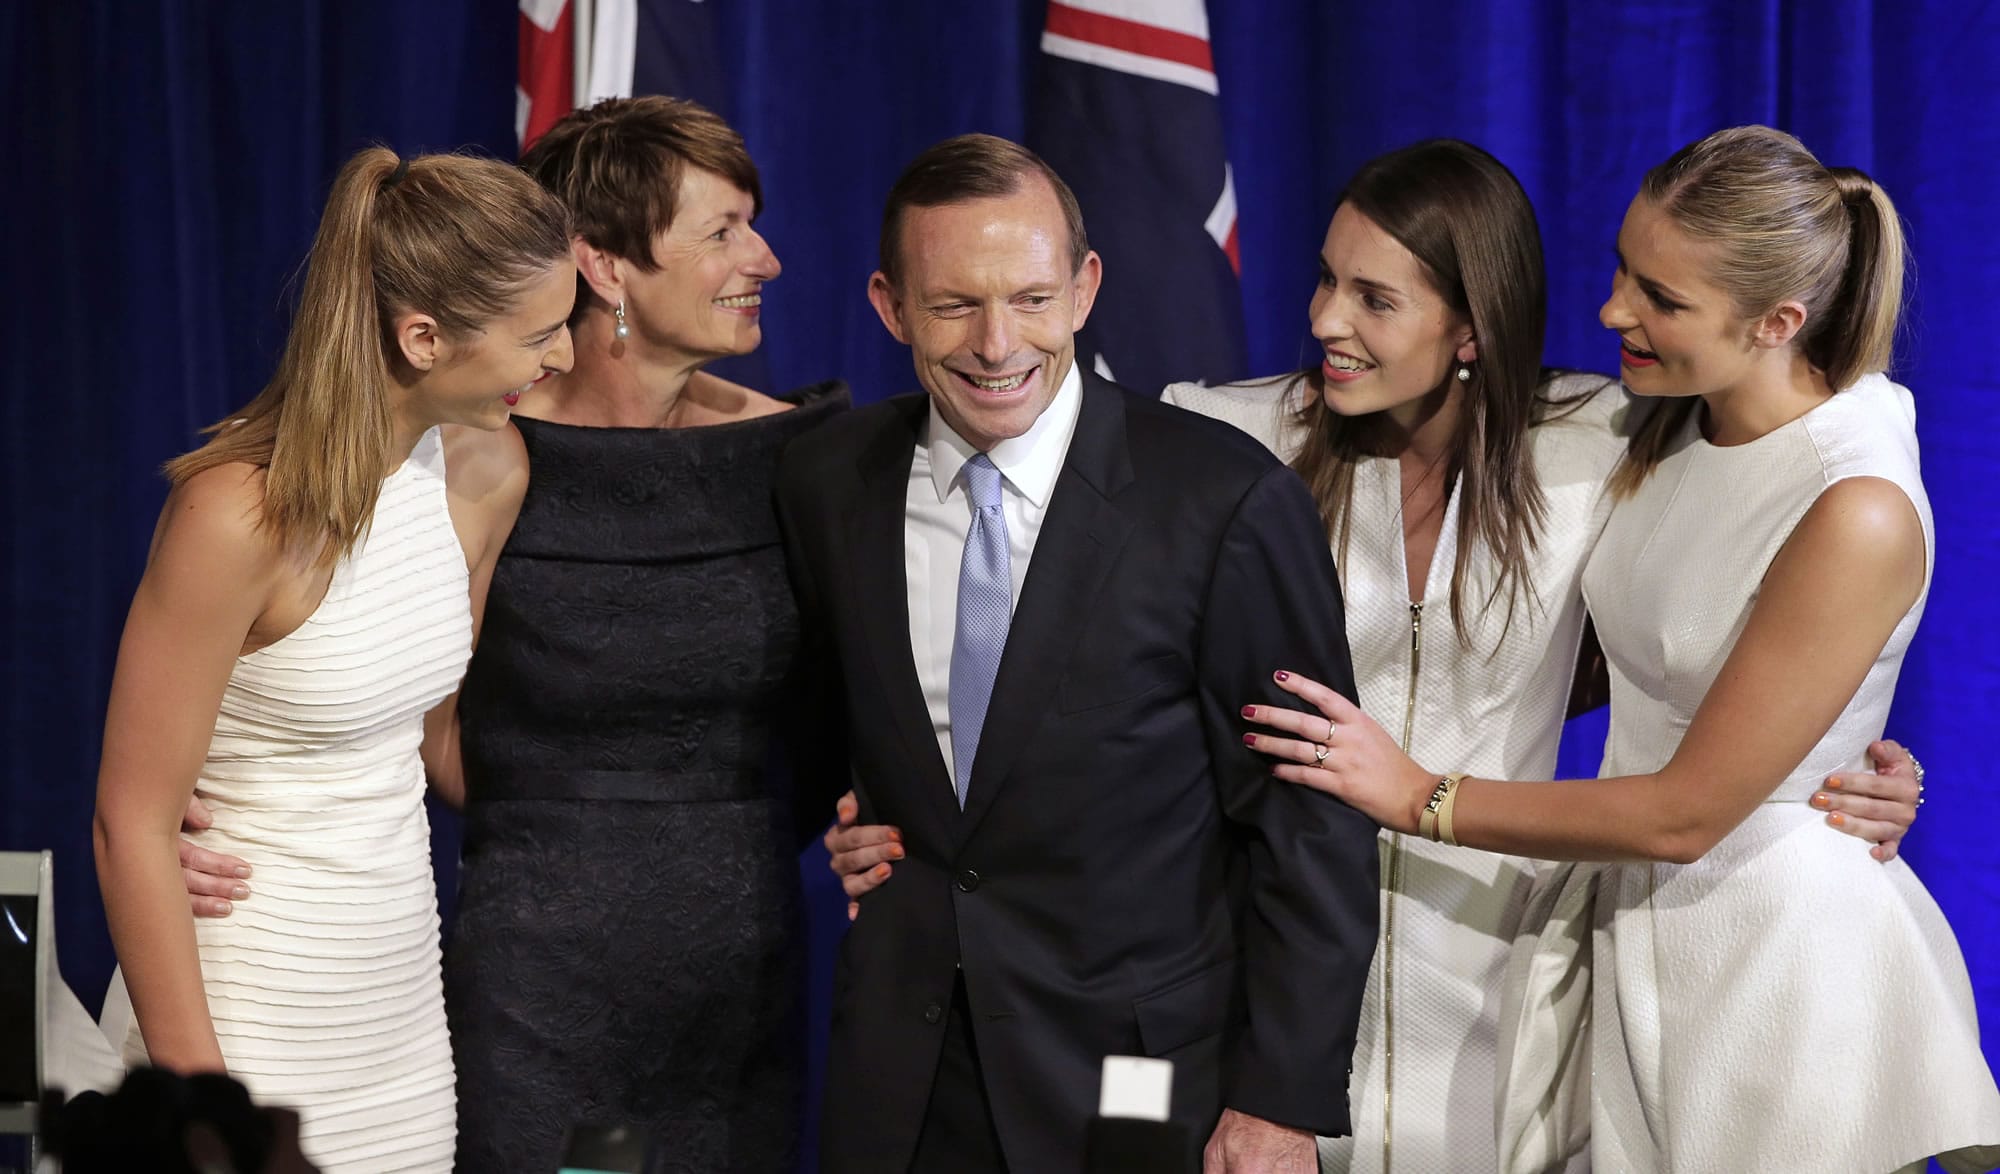 Tony Abbott, center, his wife, Margaret, in dark dress, and daughters, from left, Frances, Louise and Bridget celebrate his victory Saturday in Australia's national election.